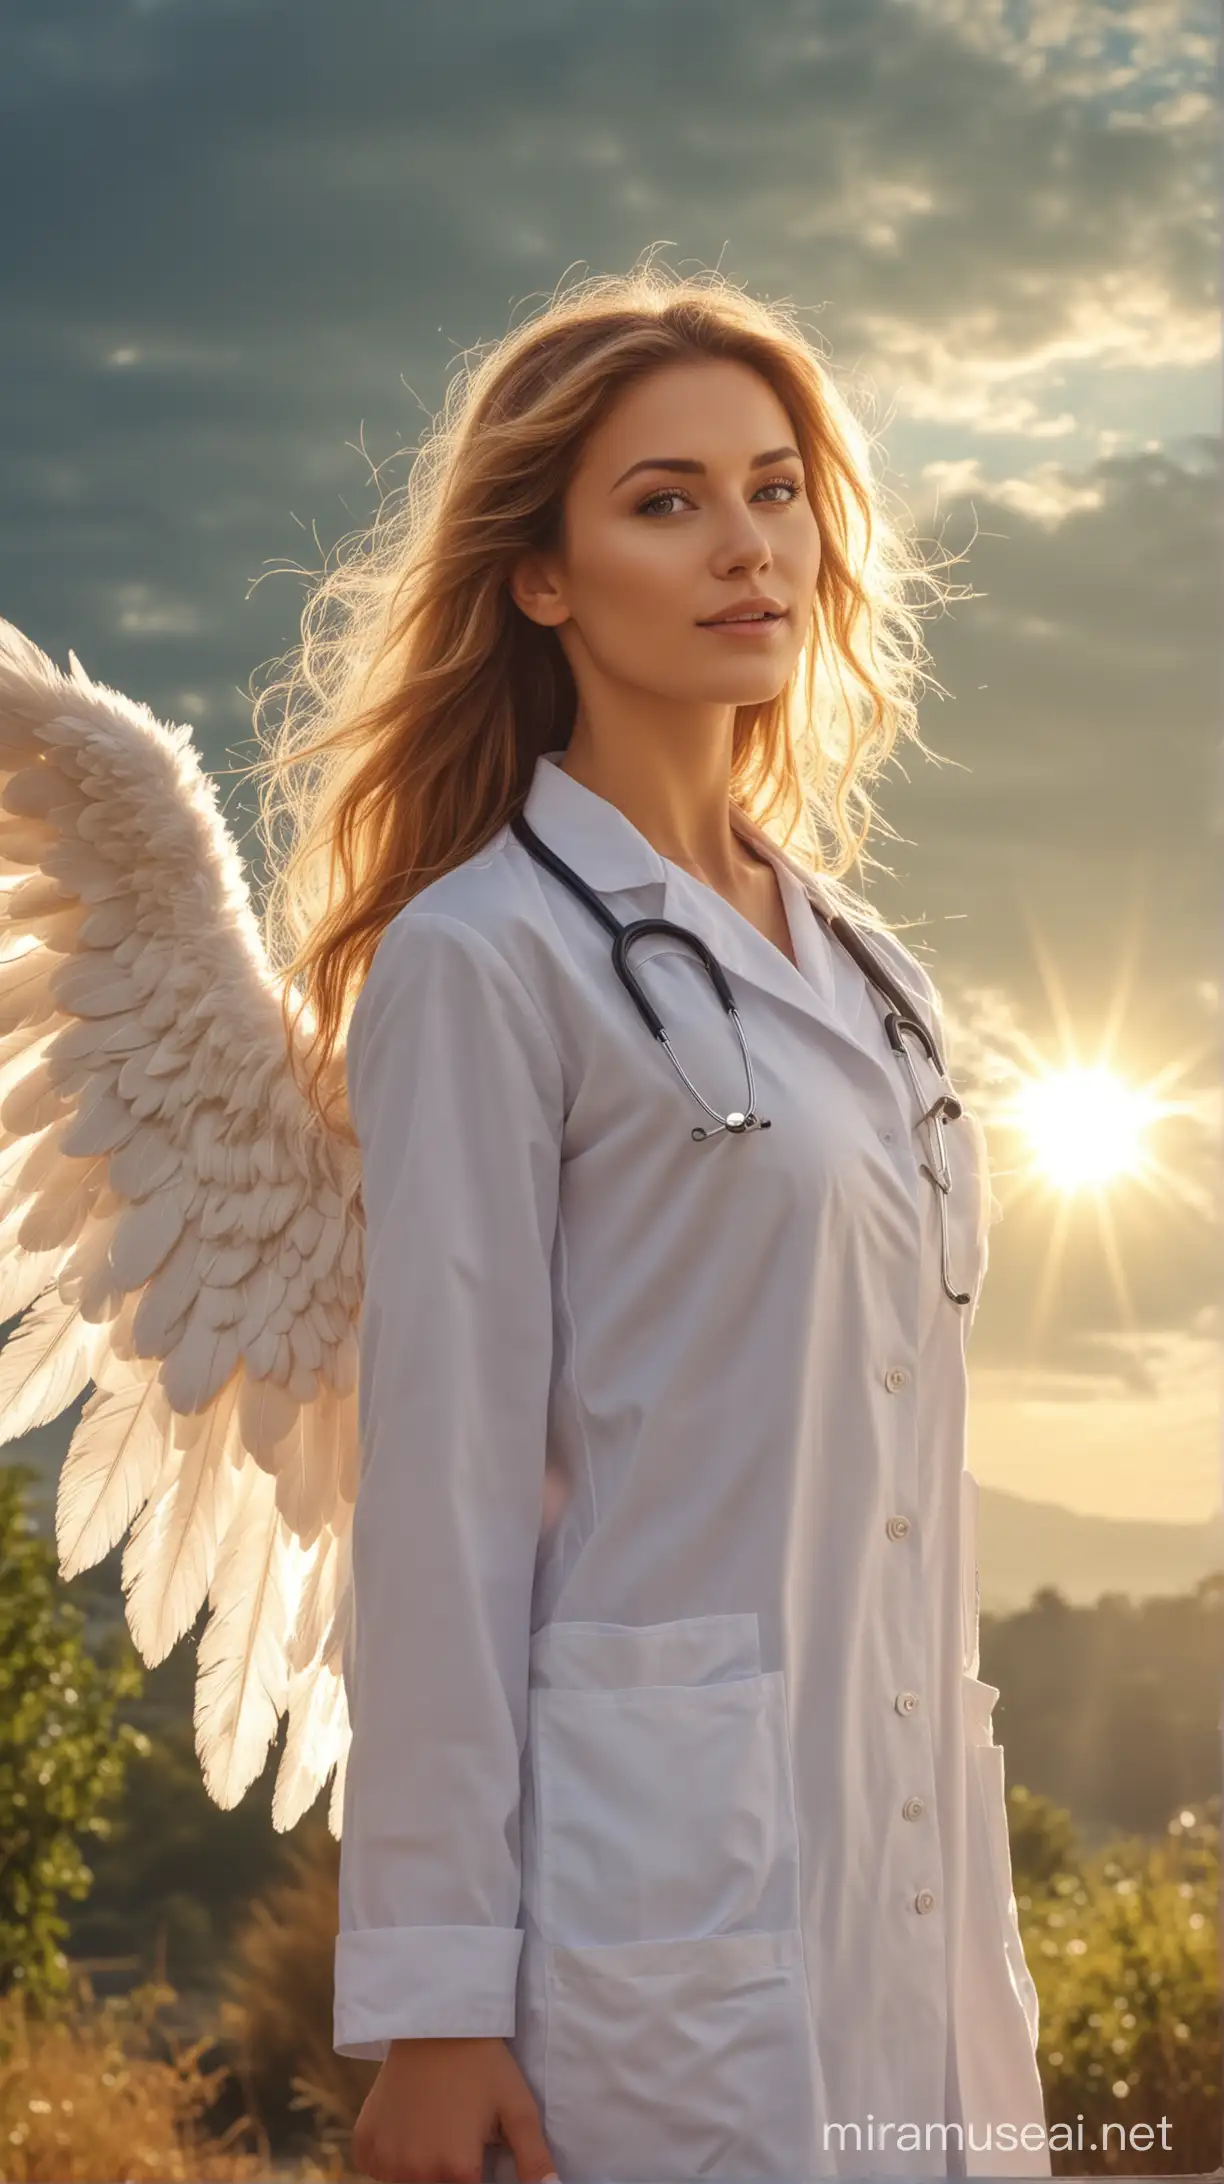 Beautiful Angel women doctor, natural background, sun light effect, 4k, HDR, morning time weather